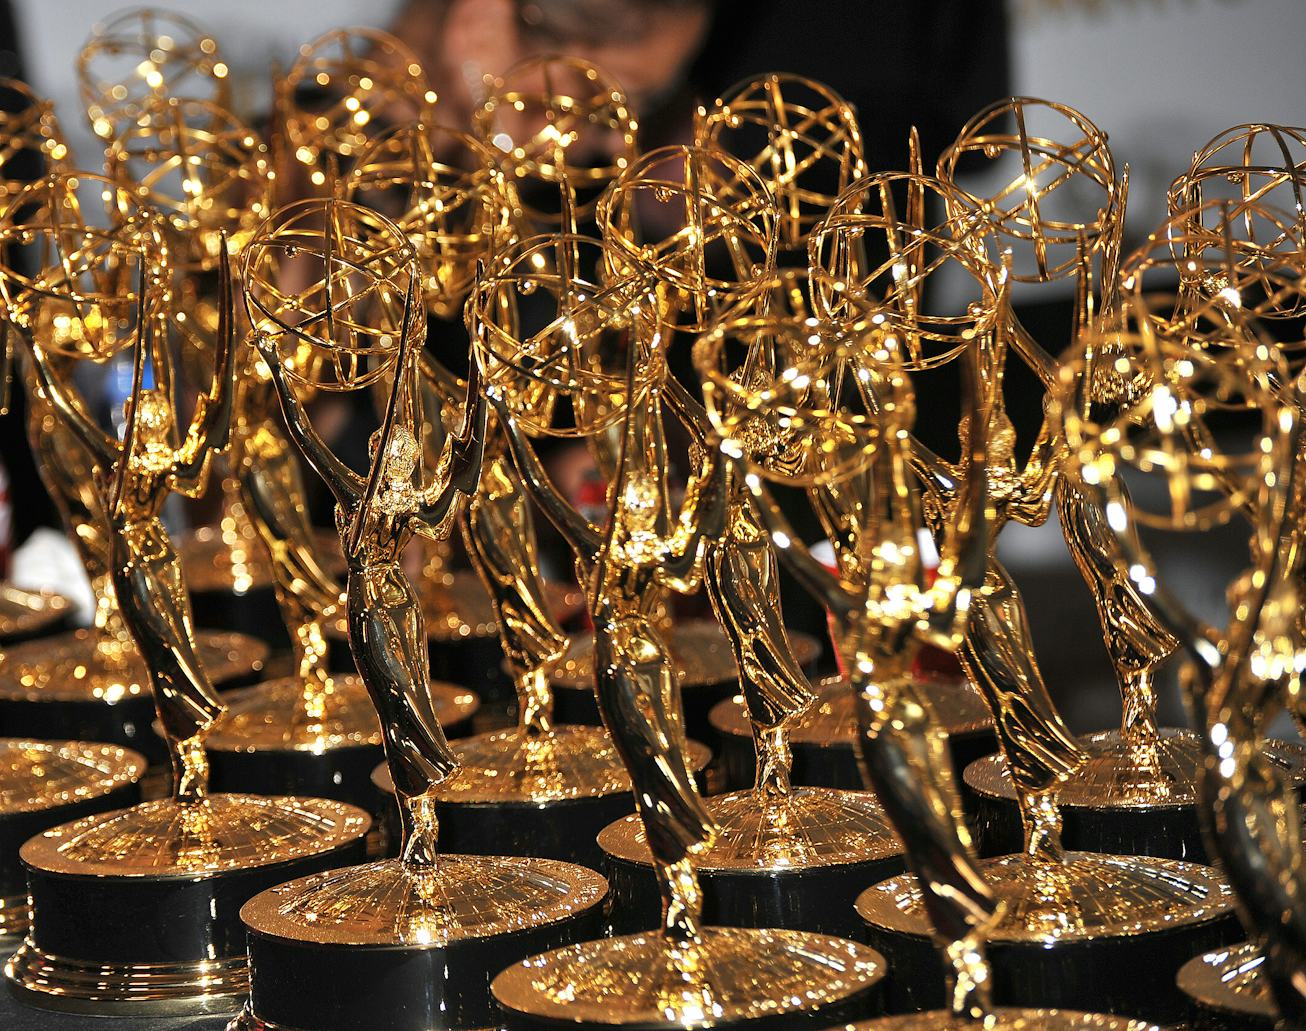 Here's how to watch the 2021 Emmy Awards on Sunday night.